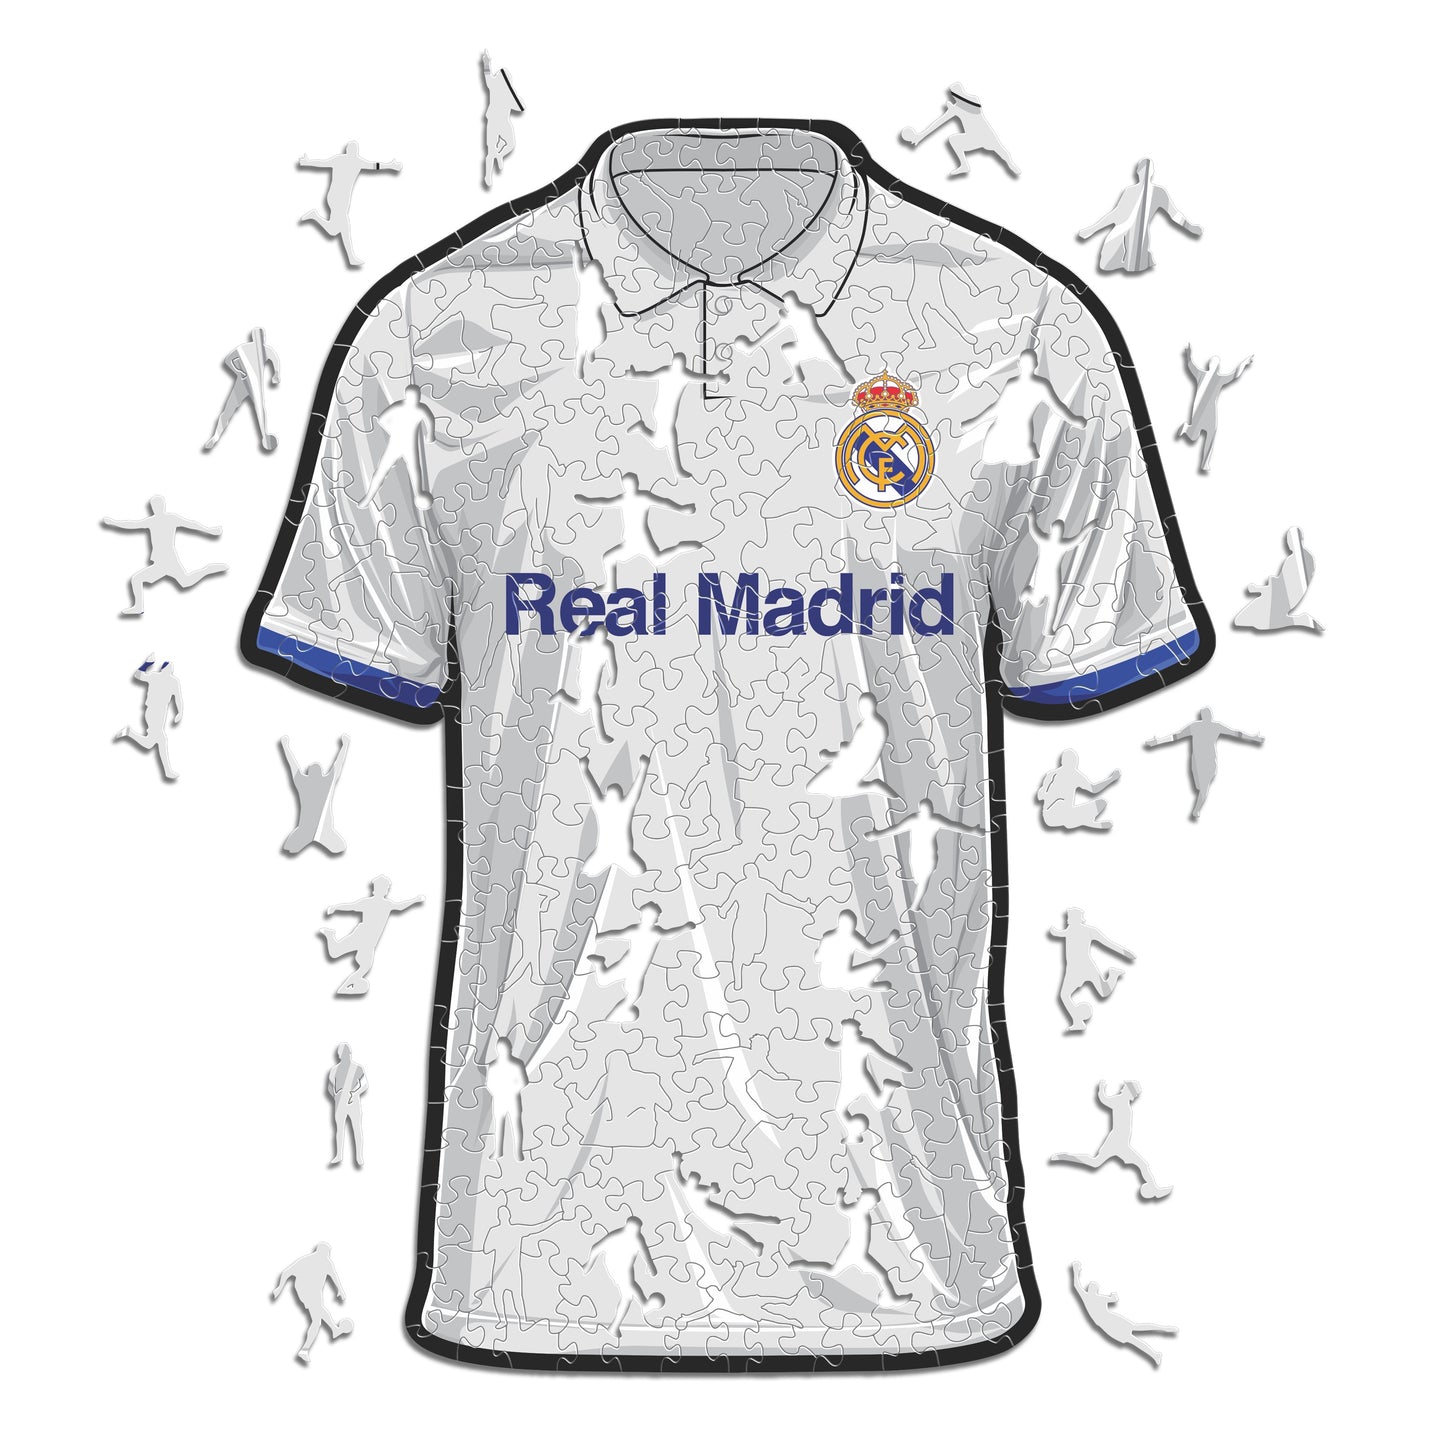 Real Madrid CF® Jersey - Wooden Puzzle